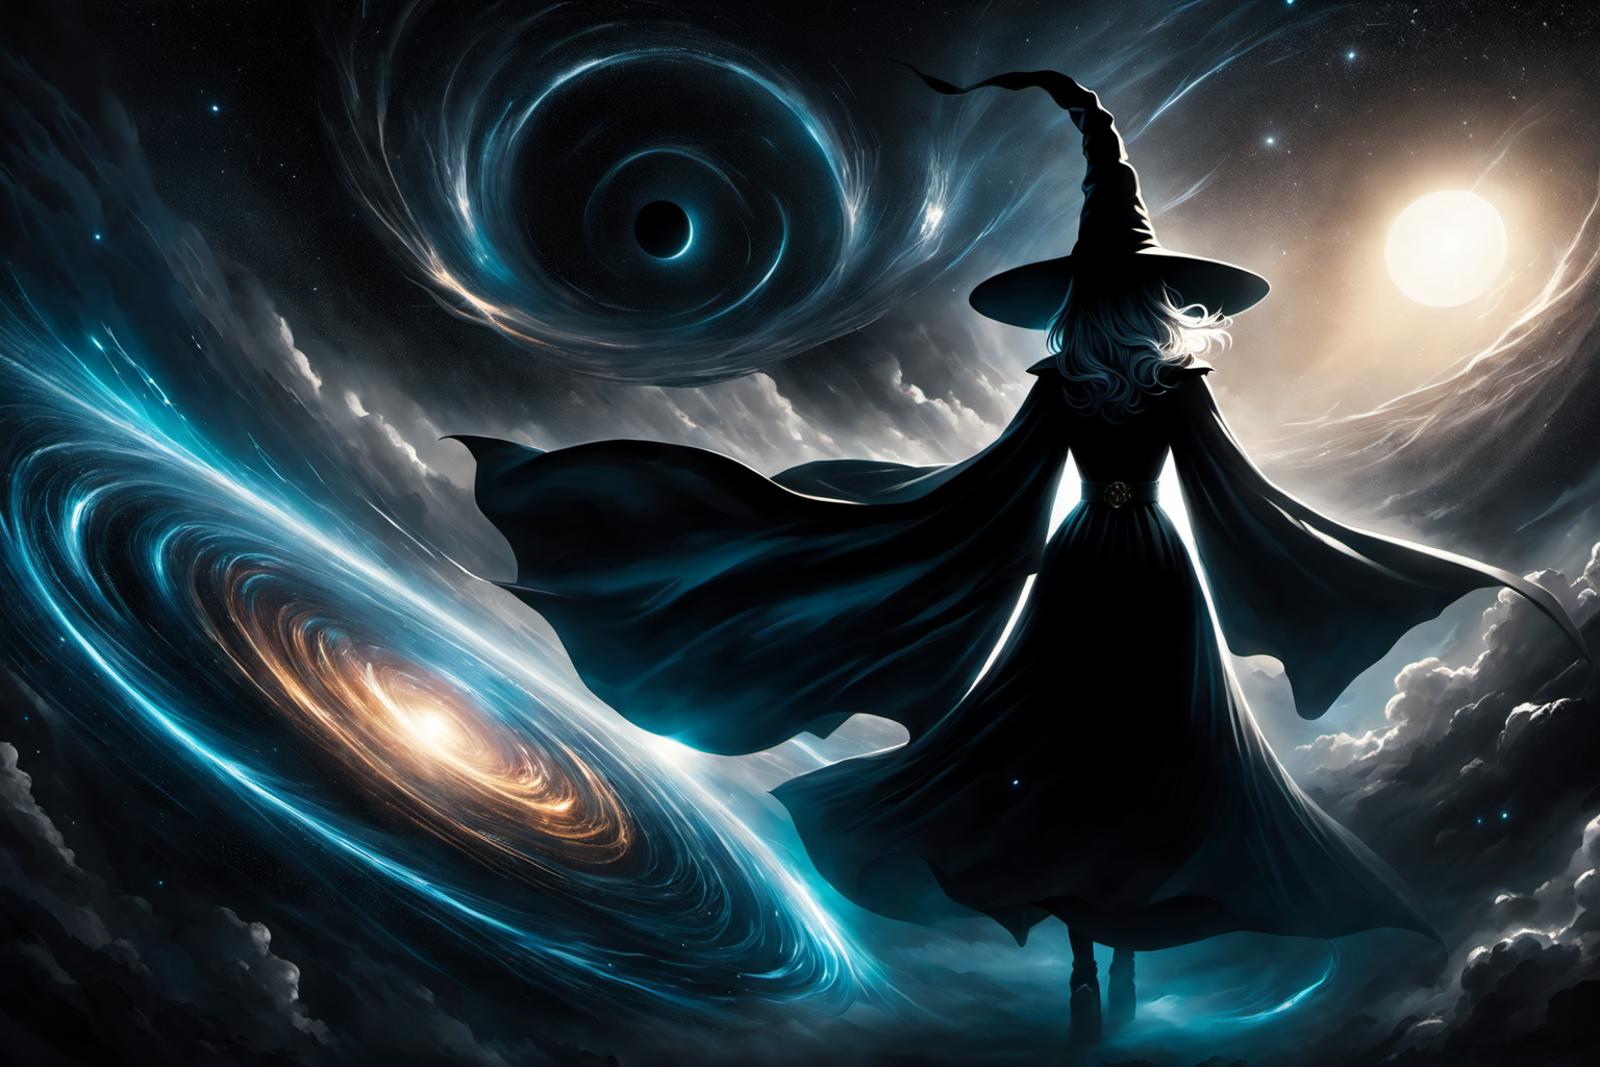 A witch in a black gown standing in a black background with a swirling blue sky.